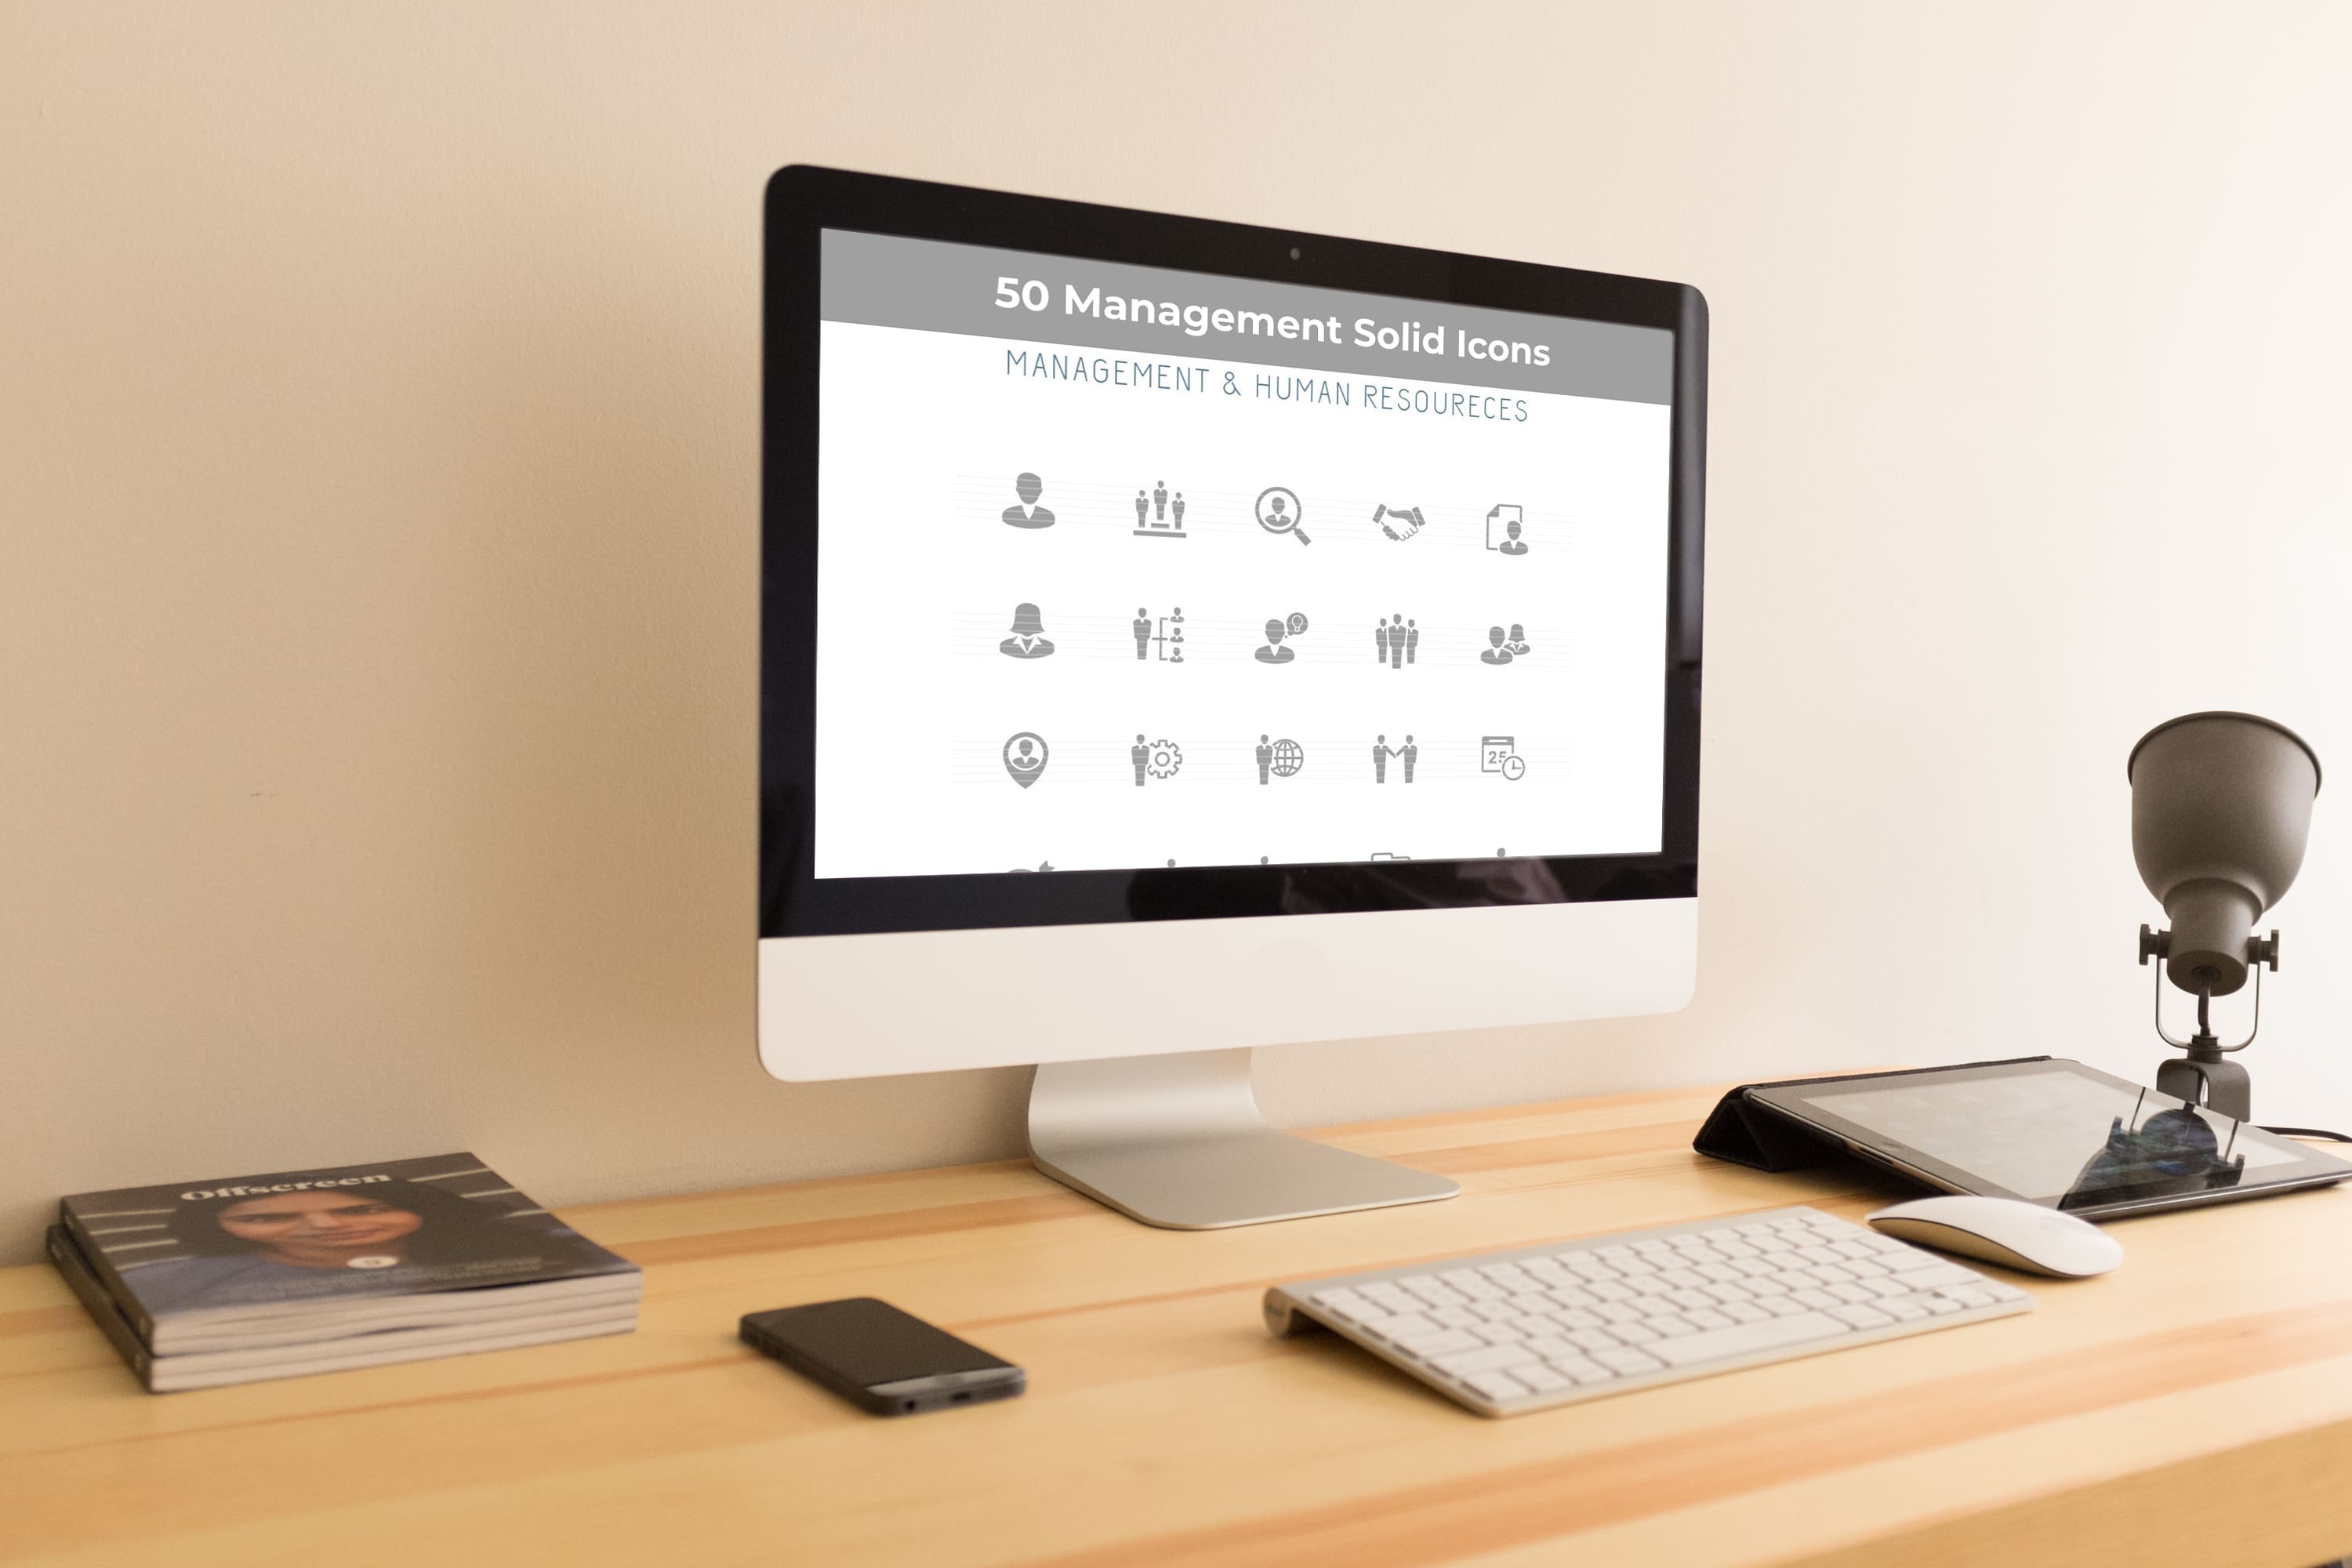 Desktop option of the 50 Management Solid Icons.